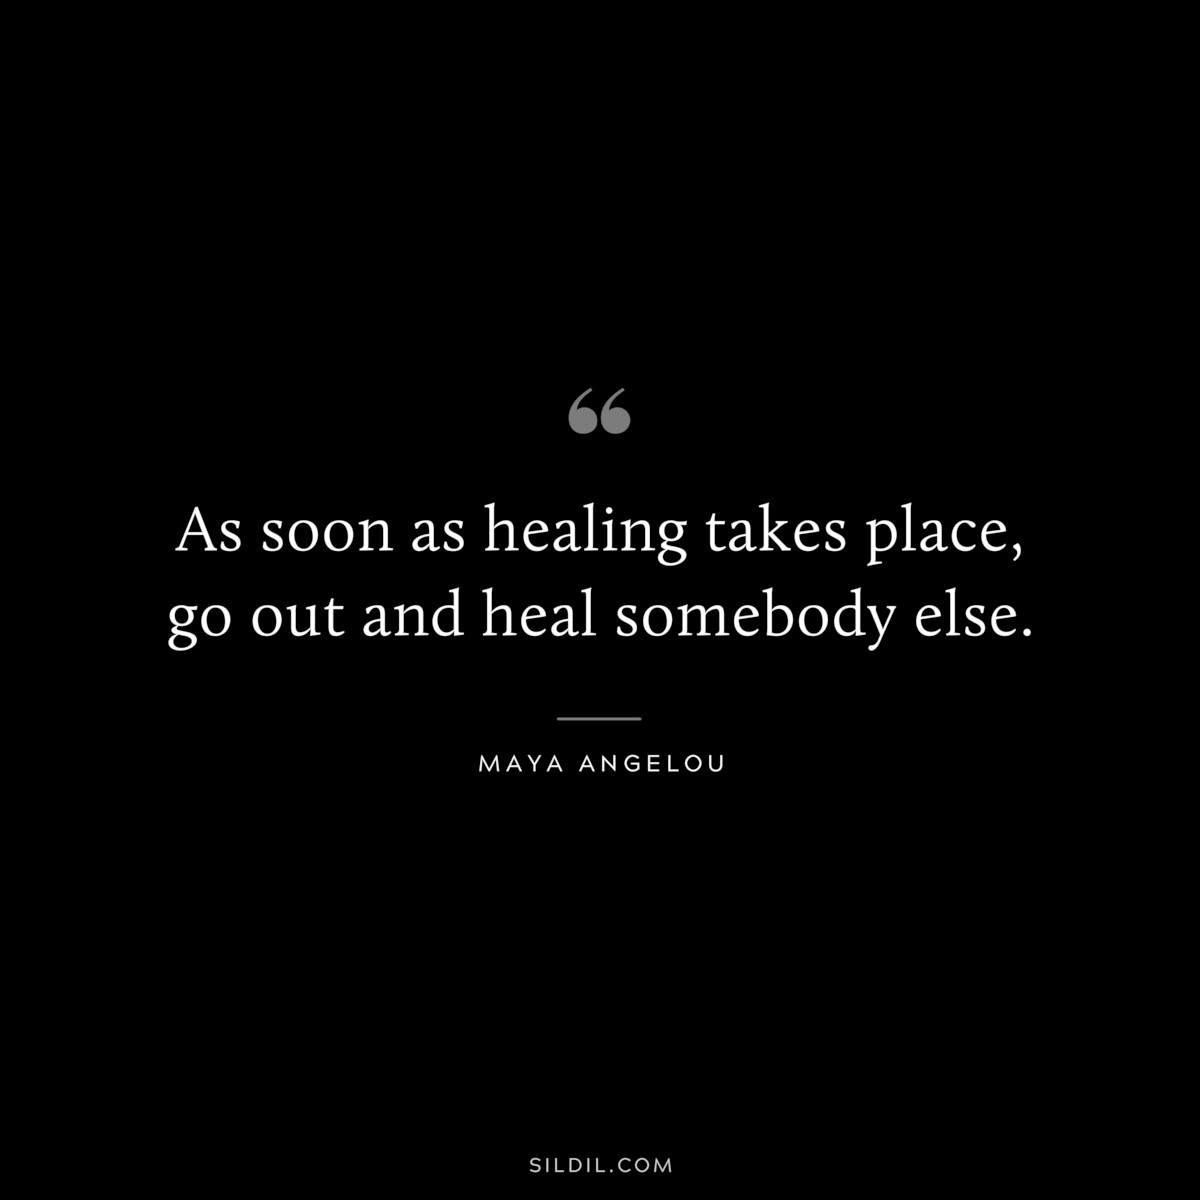 As soon as healing takes place, go out and heal somebody else. ― Maya Angelou